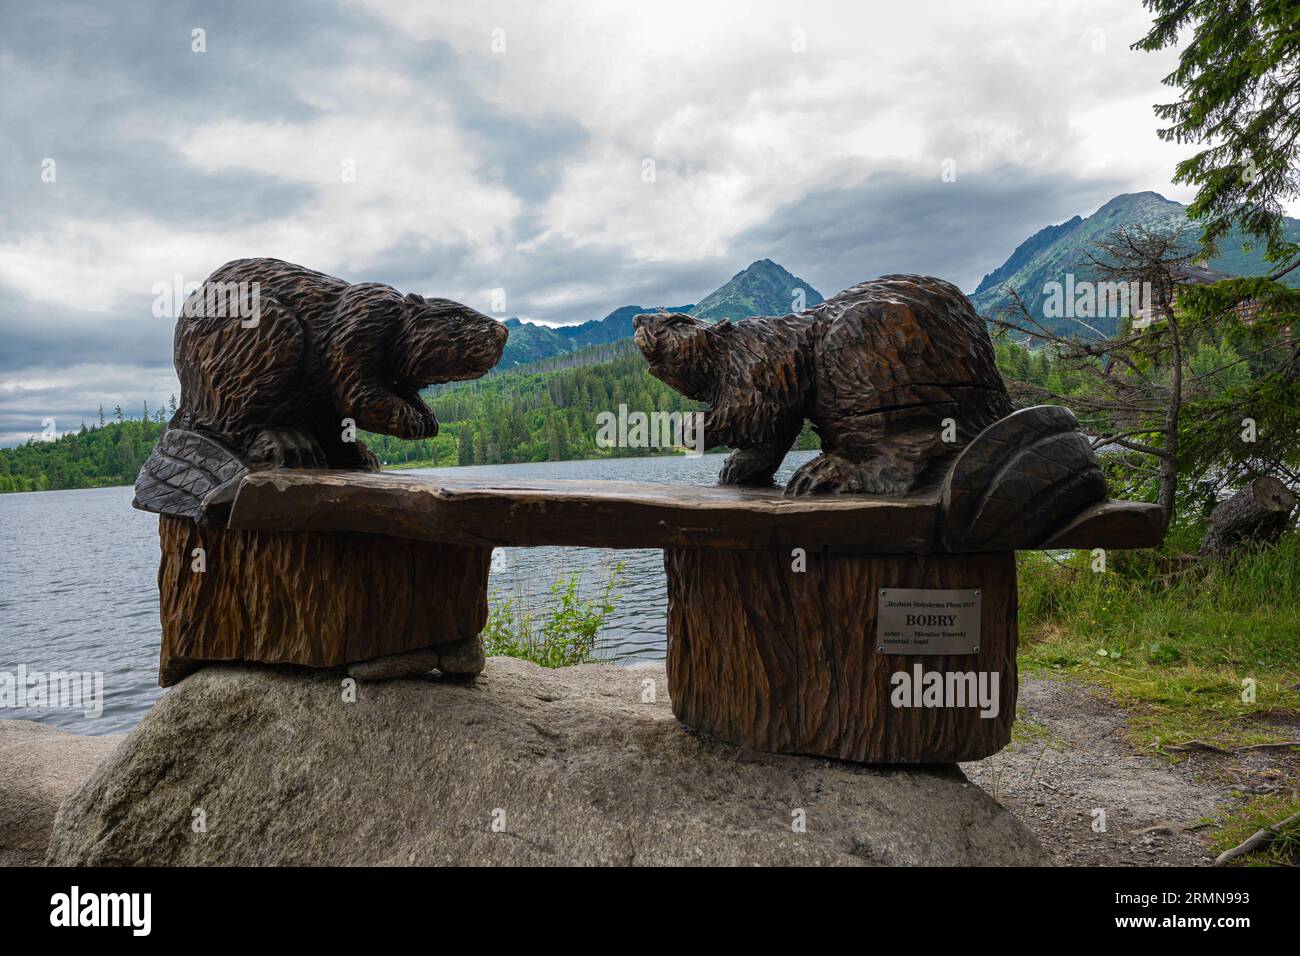 Wooden beavers on a table on the shore of a lake in the Tatra mountains of Slovakia. Stock Photo